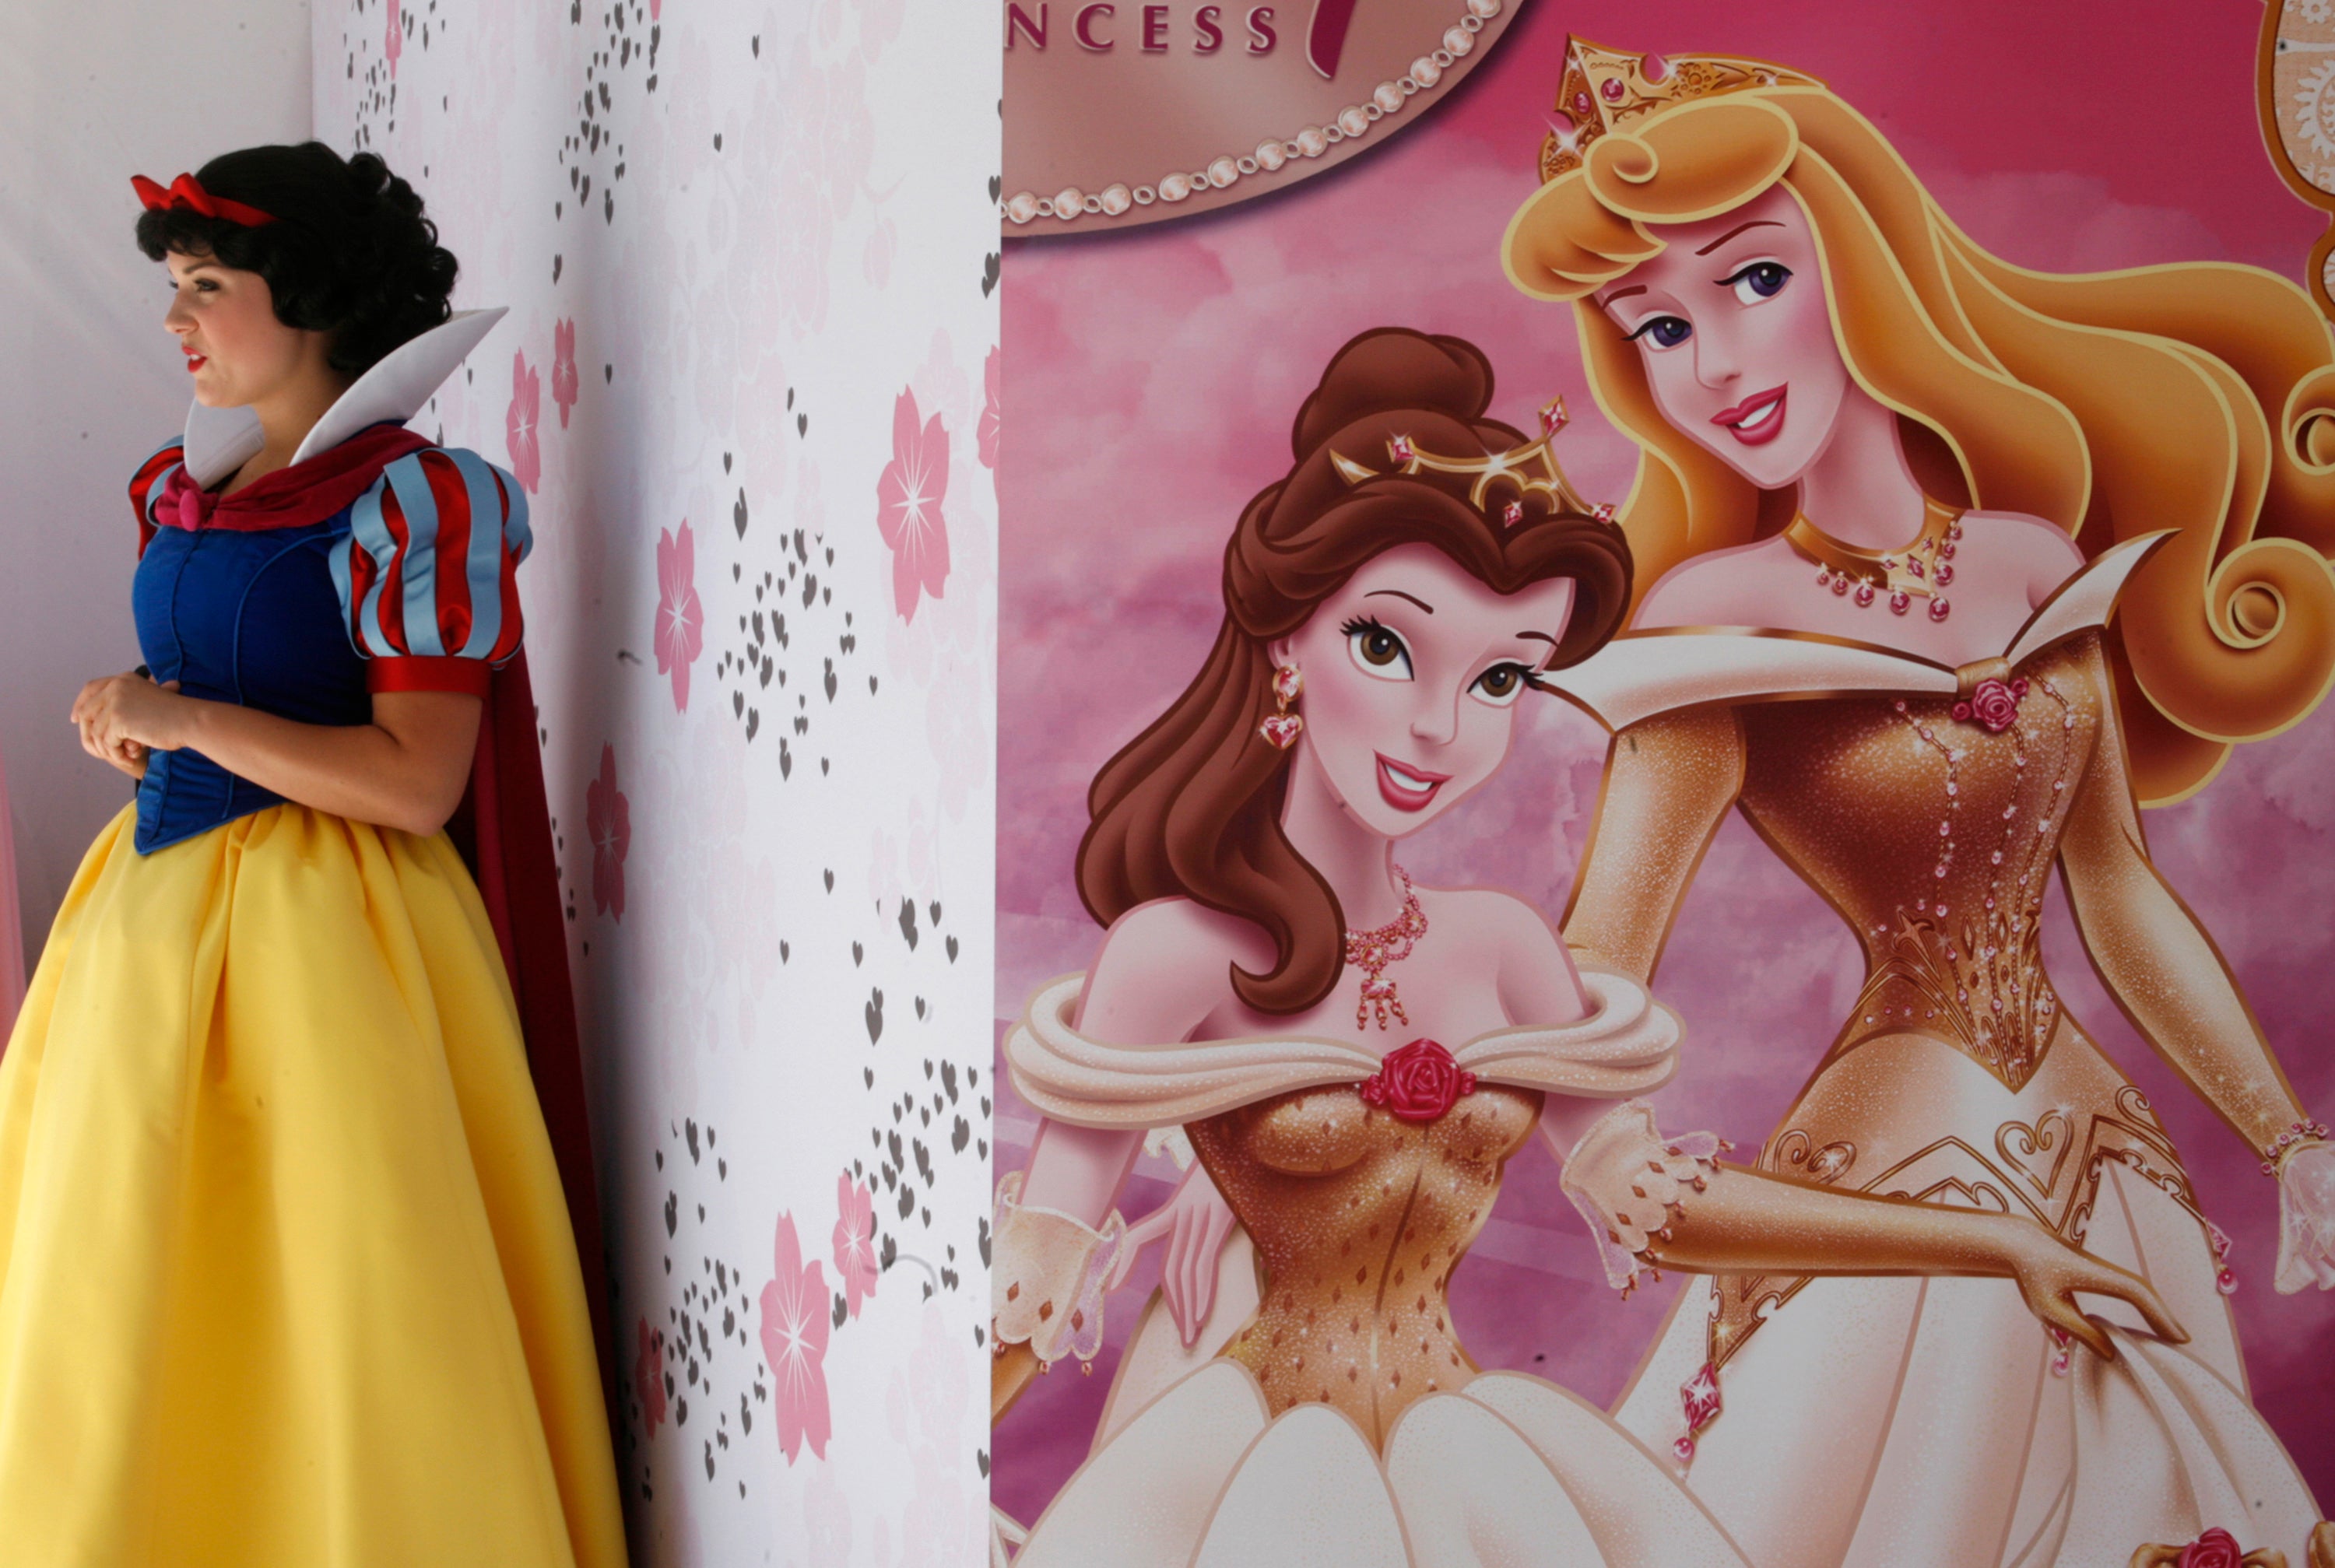 Actress Tamzin Outhwaite has said Disney princesses are 'bad role models'